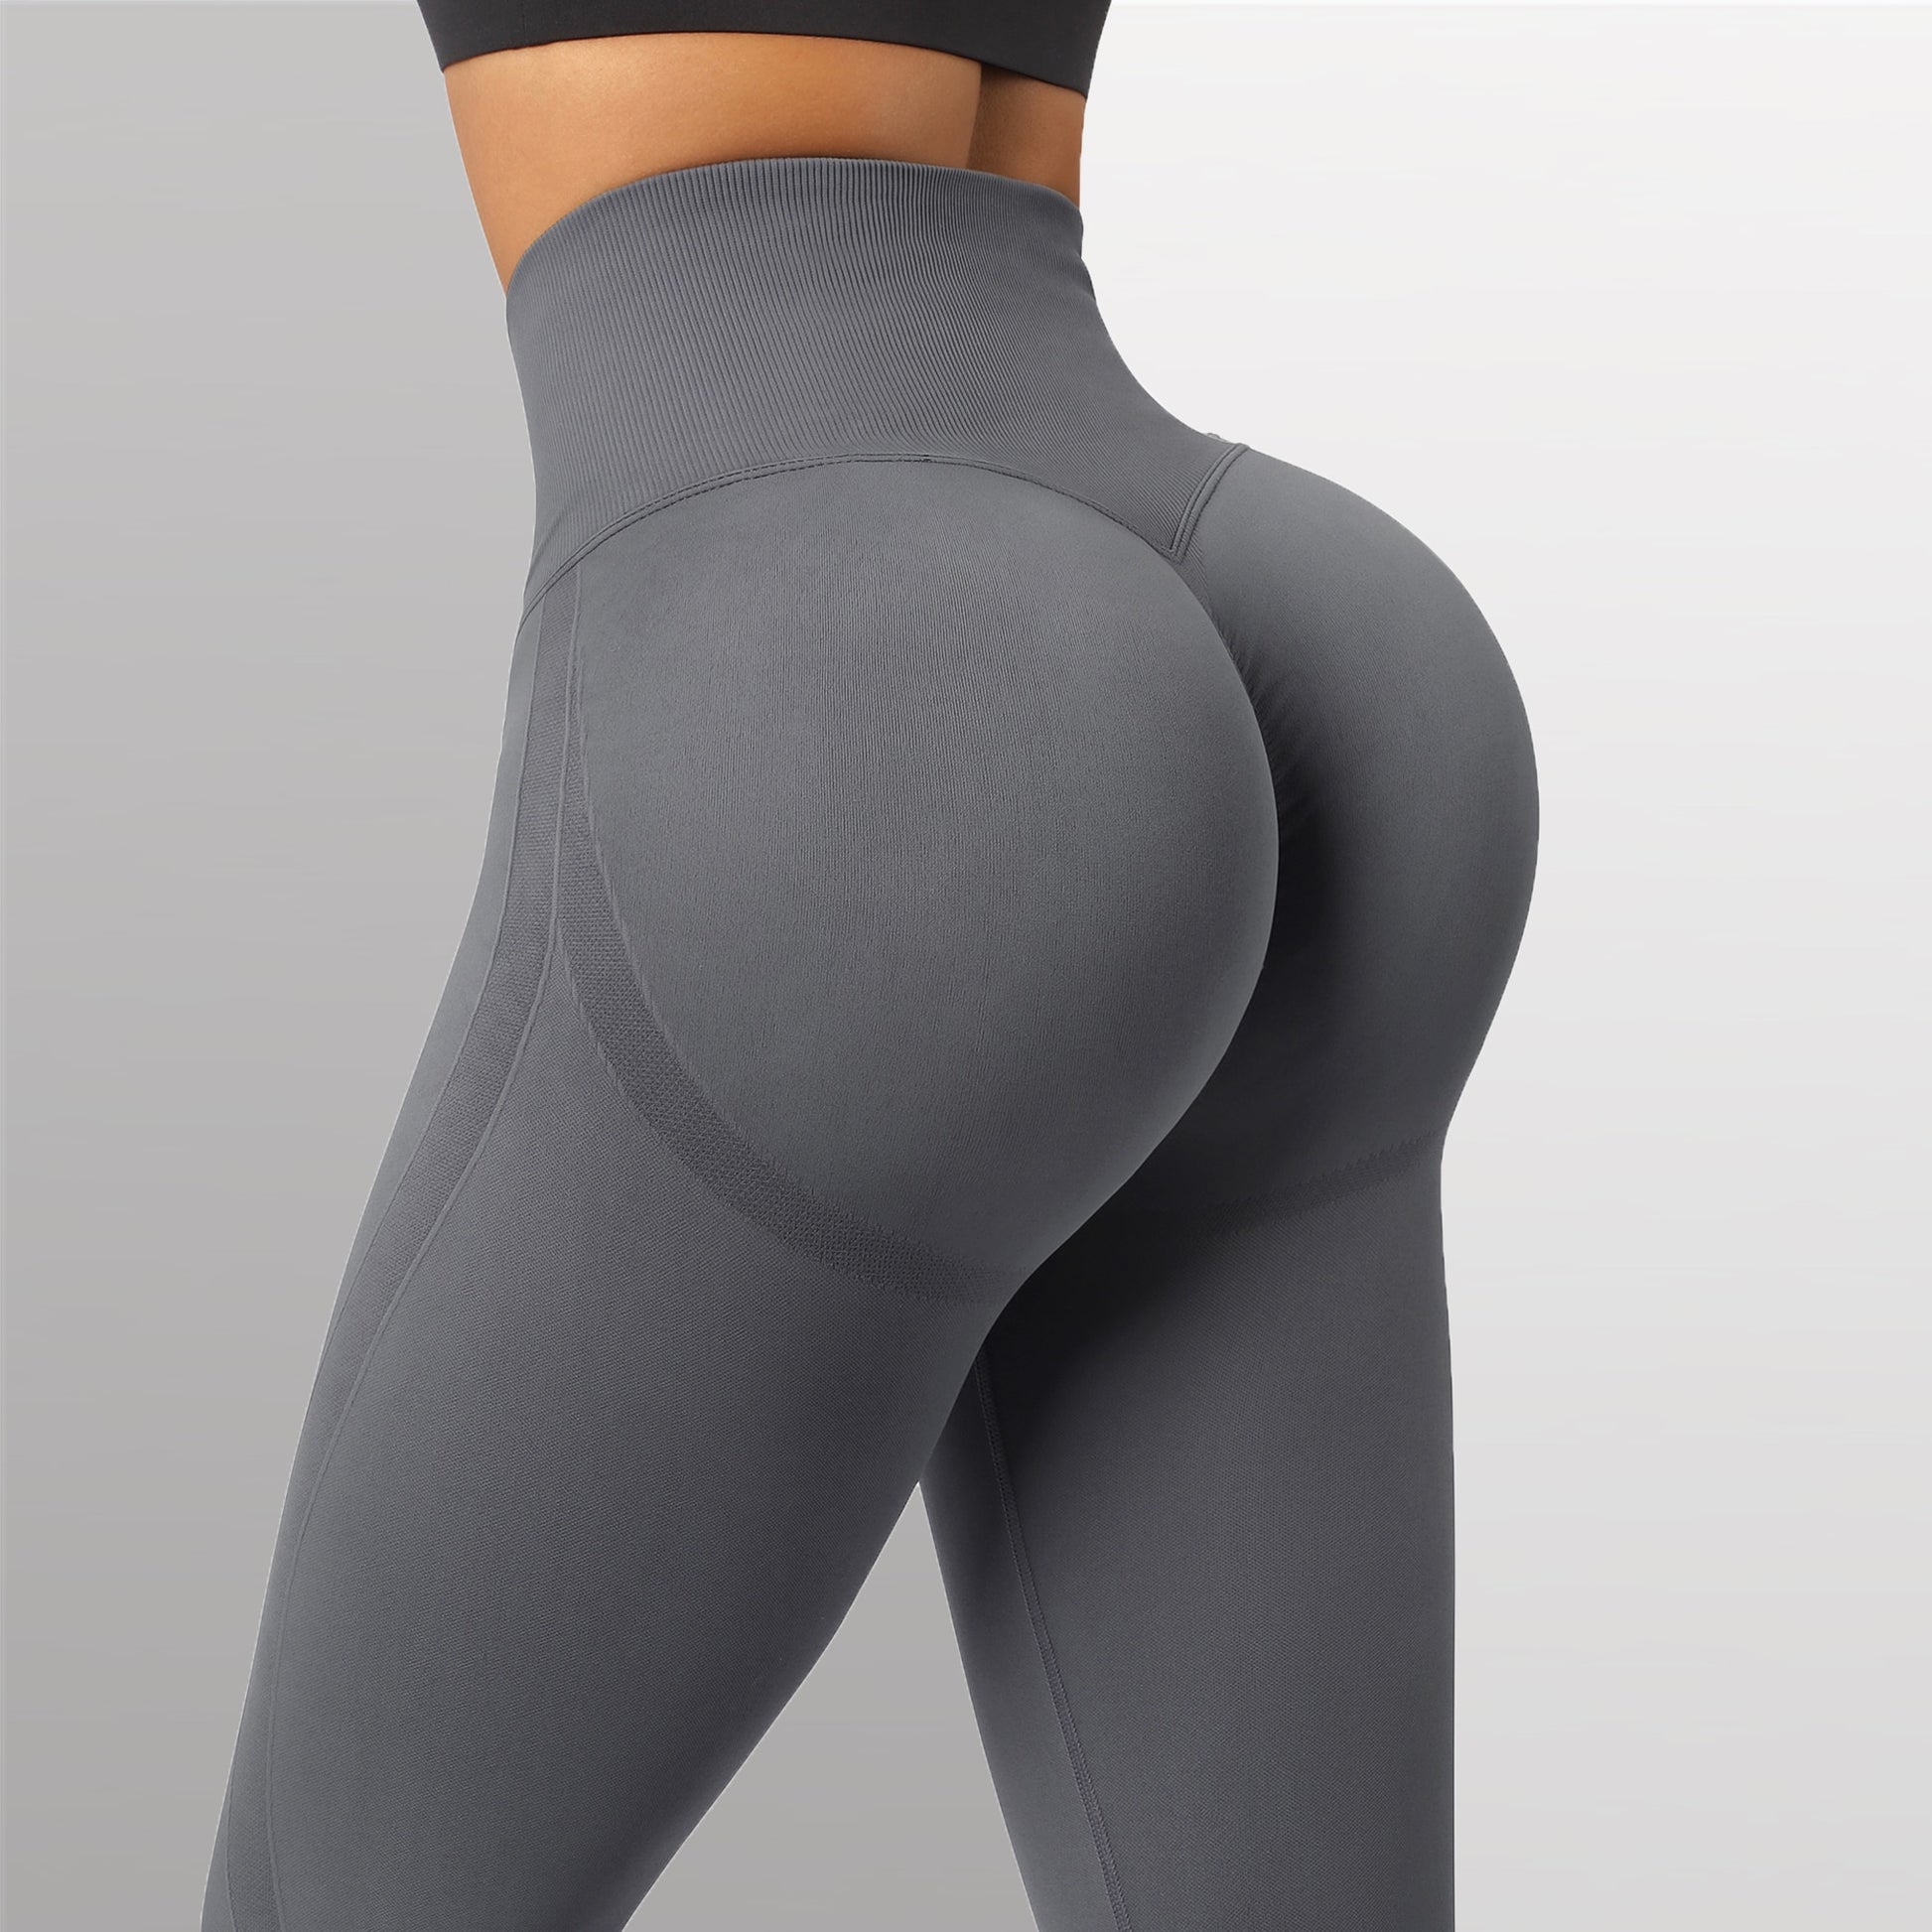 RUUHEE High Waist Seamless Push Up Seamless Workout Leggings For Women  Perfect For Fitness, Running, Yoga, Gym And Workout Tight Trousers For  Sports And Fitness 210929 From Kong003, $10.95